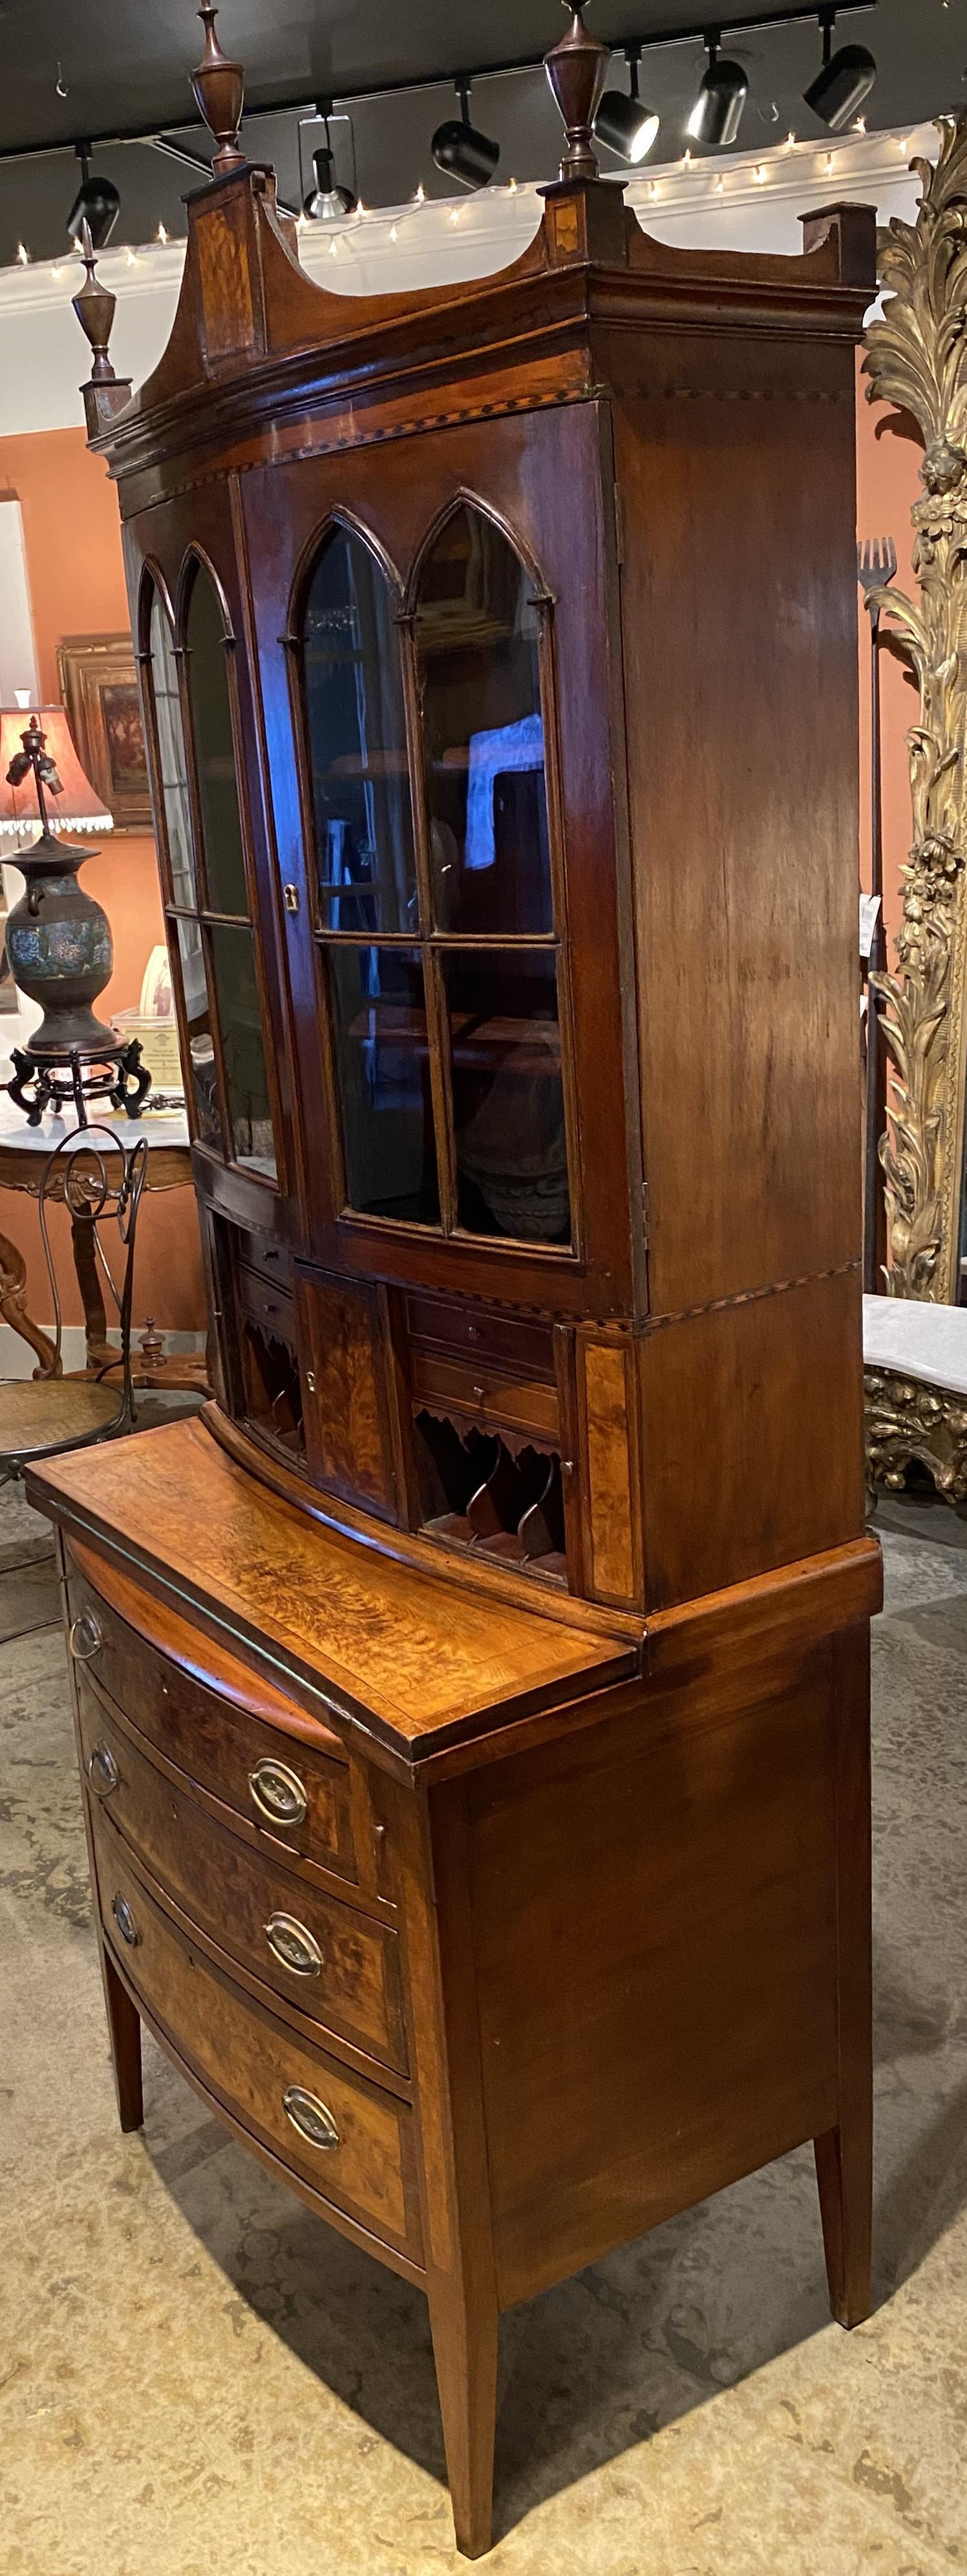 Federal Style Diminutive Two Part Inlaid Mahogany Bookcase Secretary For Sale 7